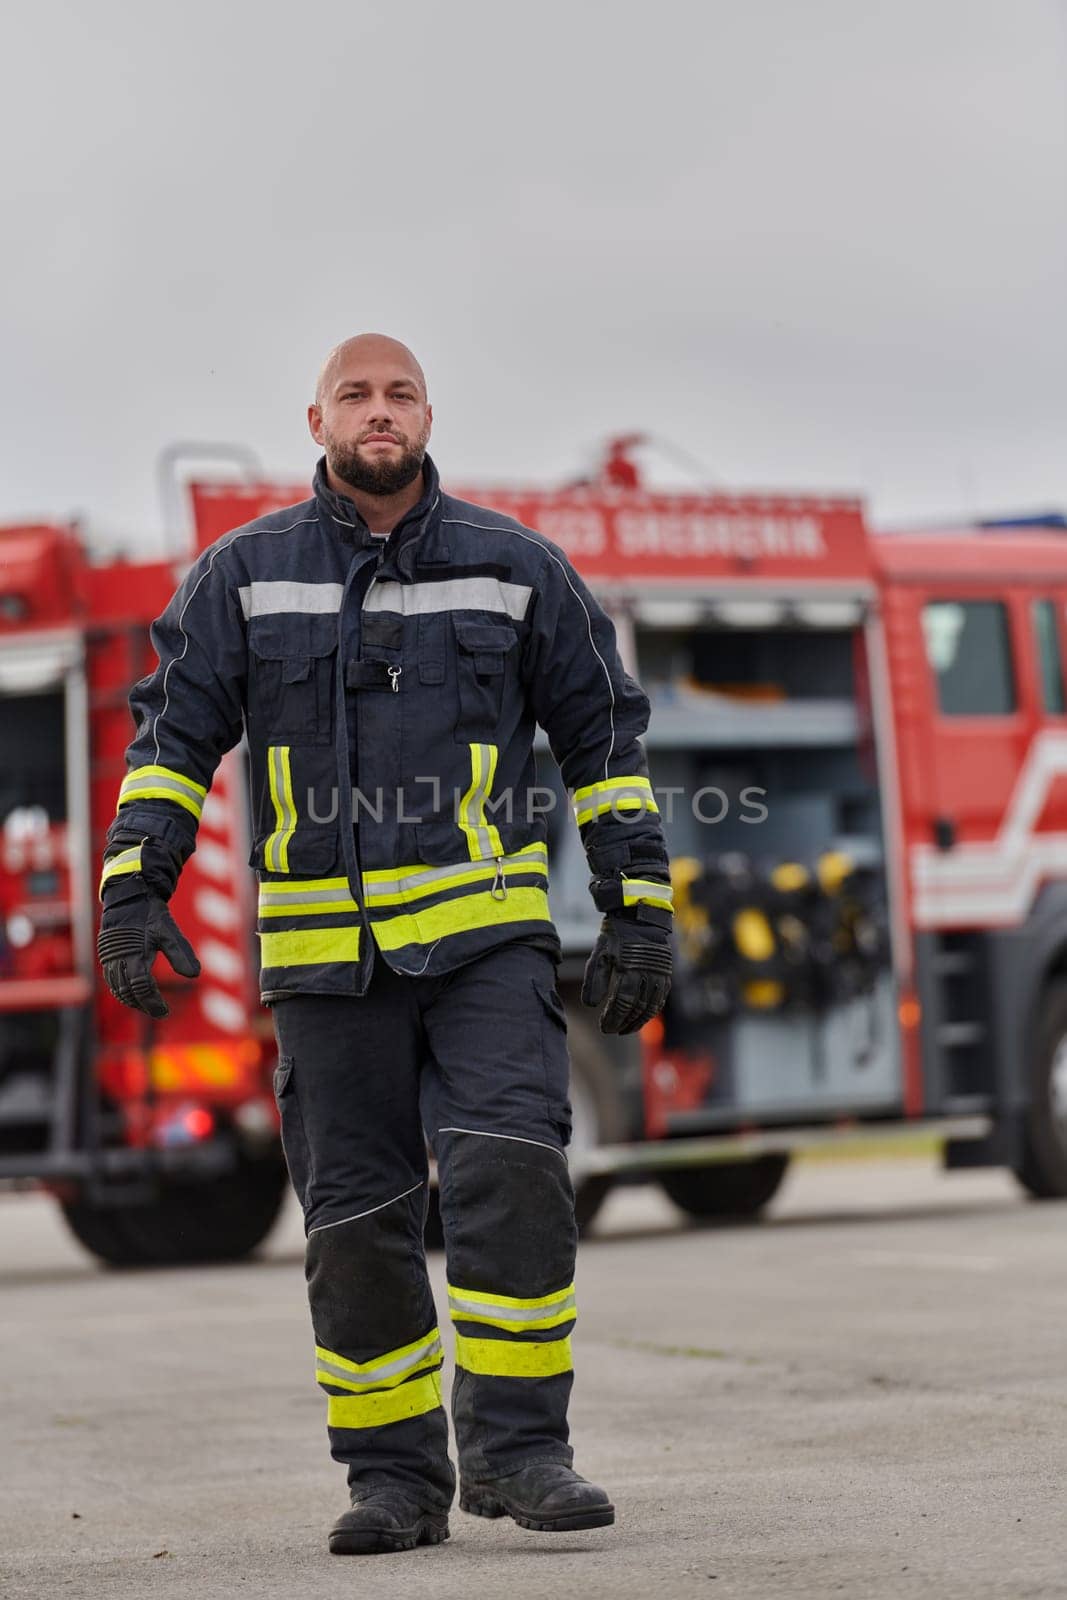 A symbolically brave firefighter strides forward with unwavering courage, epitomizing dedication and leadership, while behind him, a modern firetruck stands ready for firefighting actions, capturing the essence of heroism and preparedness in the face of emergency.